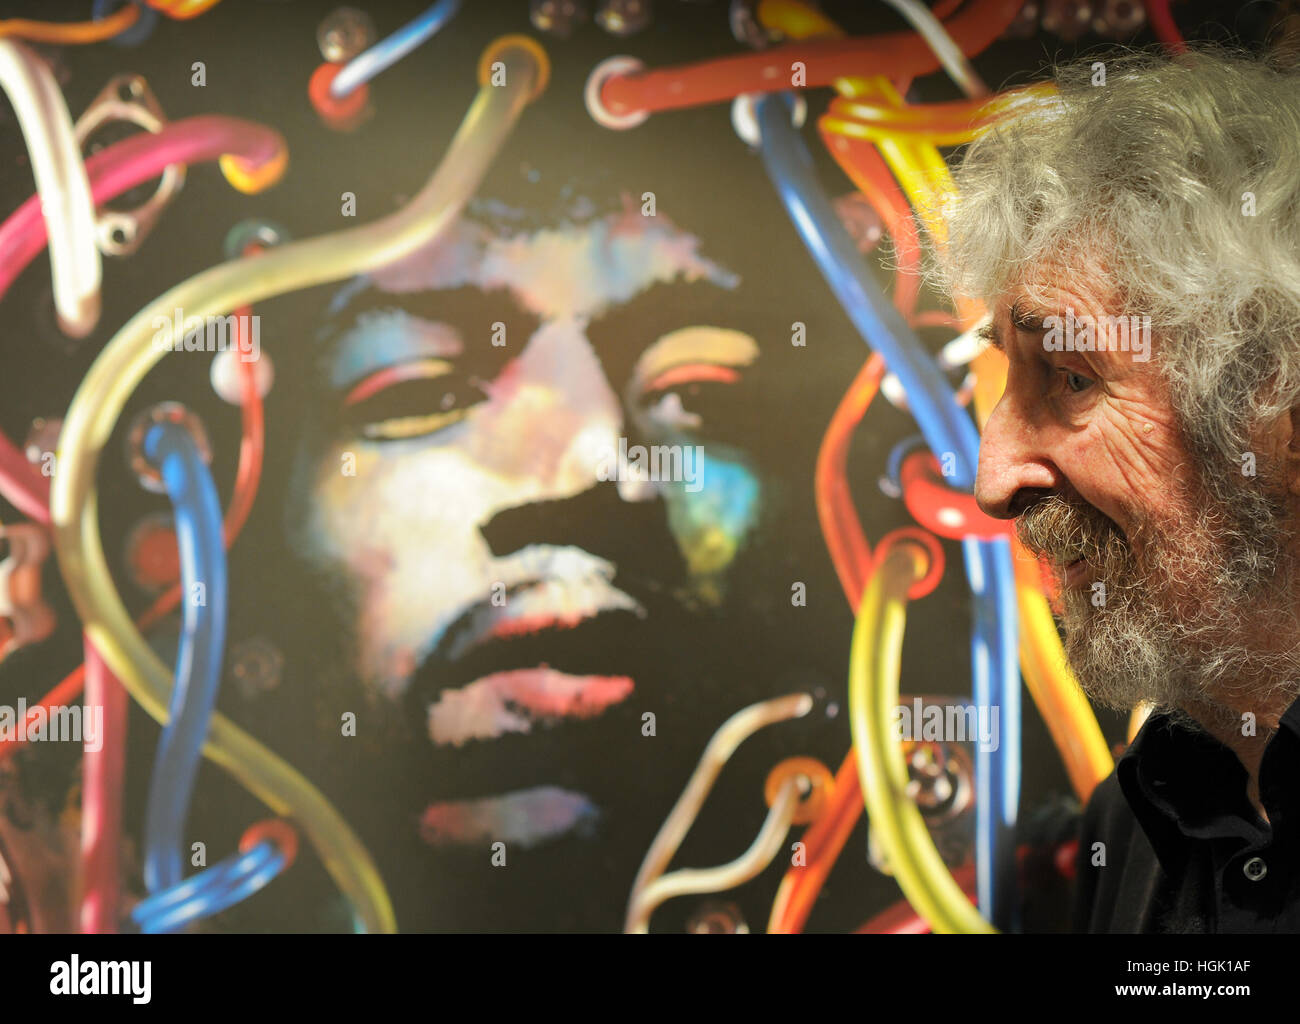 German graphic designer and sculptor Guenther Kieser stands in front of the poster for the Germany tour 1969 of singer Jimi Hendrix during the opening celebration of his exhibition 'Kieser, Plakate' at the Broehnan museum in Berlin, Germany, 20 January 2017. The Broehnan museum presents a show of the artist as part of the Blackbox series from 21 January until 23 July 2017. Photo: Roland Popp/dpa Stock Photo